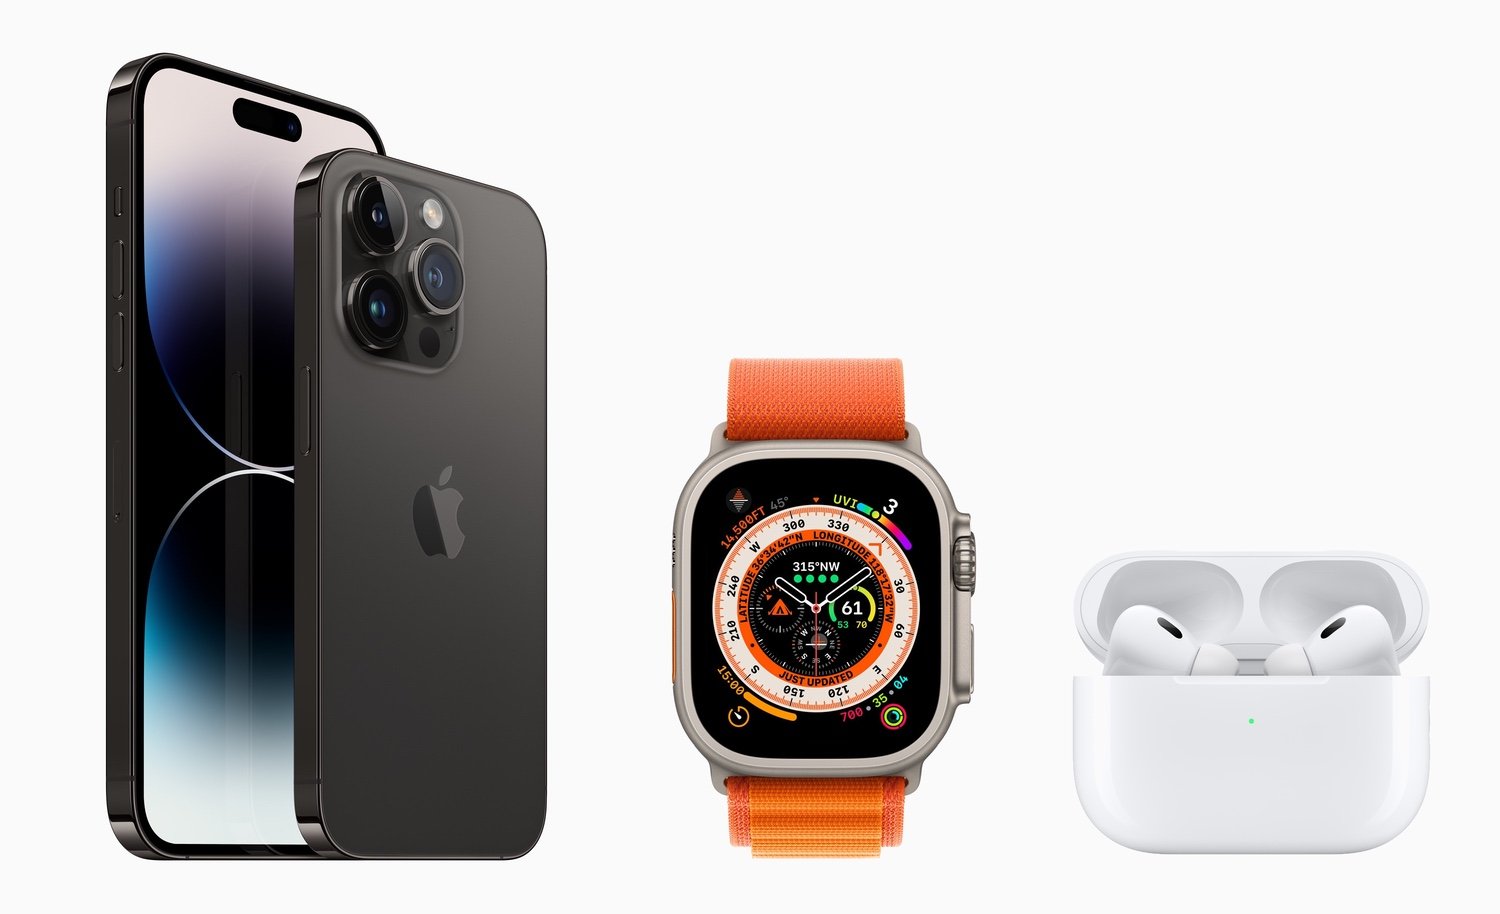 Apple Introduces iPhone 14, Apple Watch 8 and Ultra, and New AirPods Pro - The Mac Security Blog